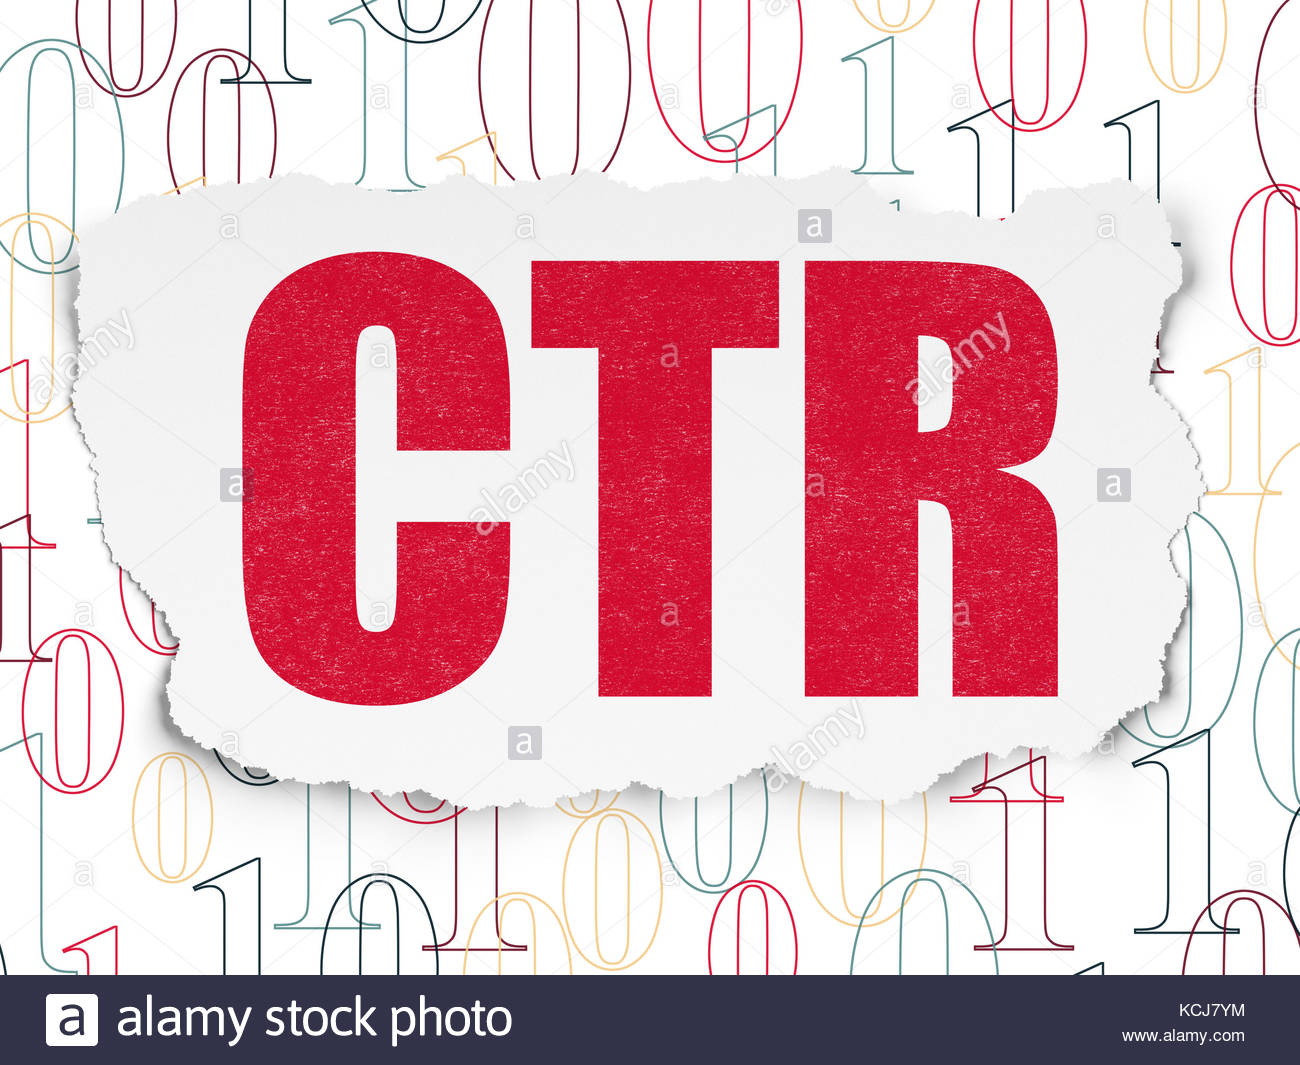 Finance Concept Ctr On Torn Paper Background Stock Photo